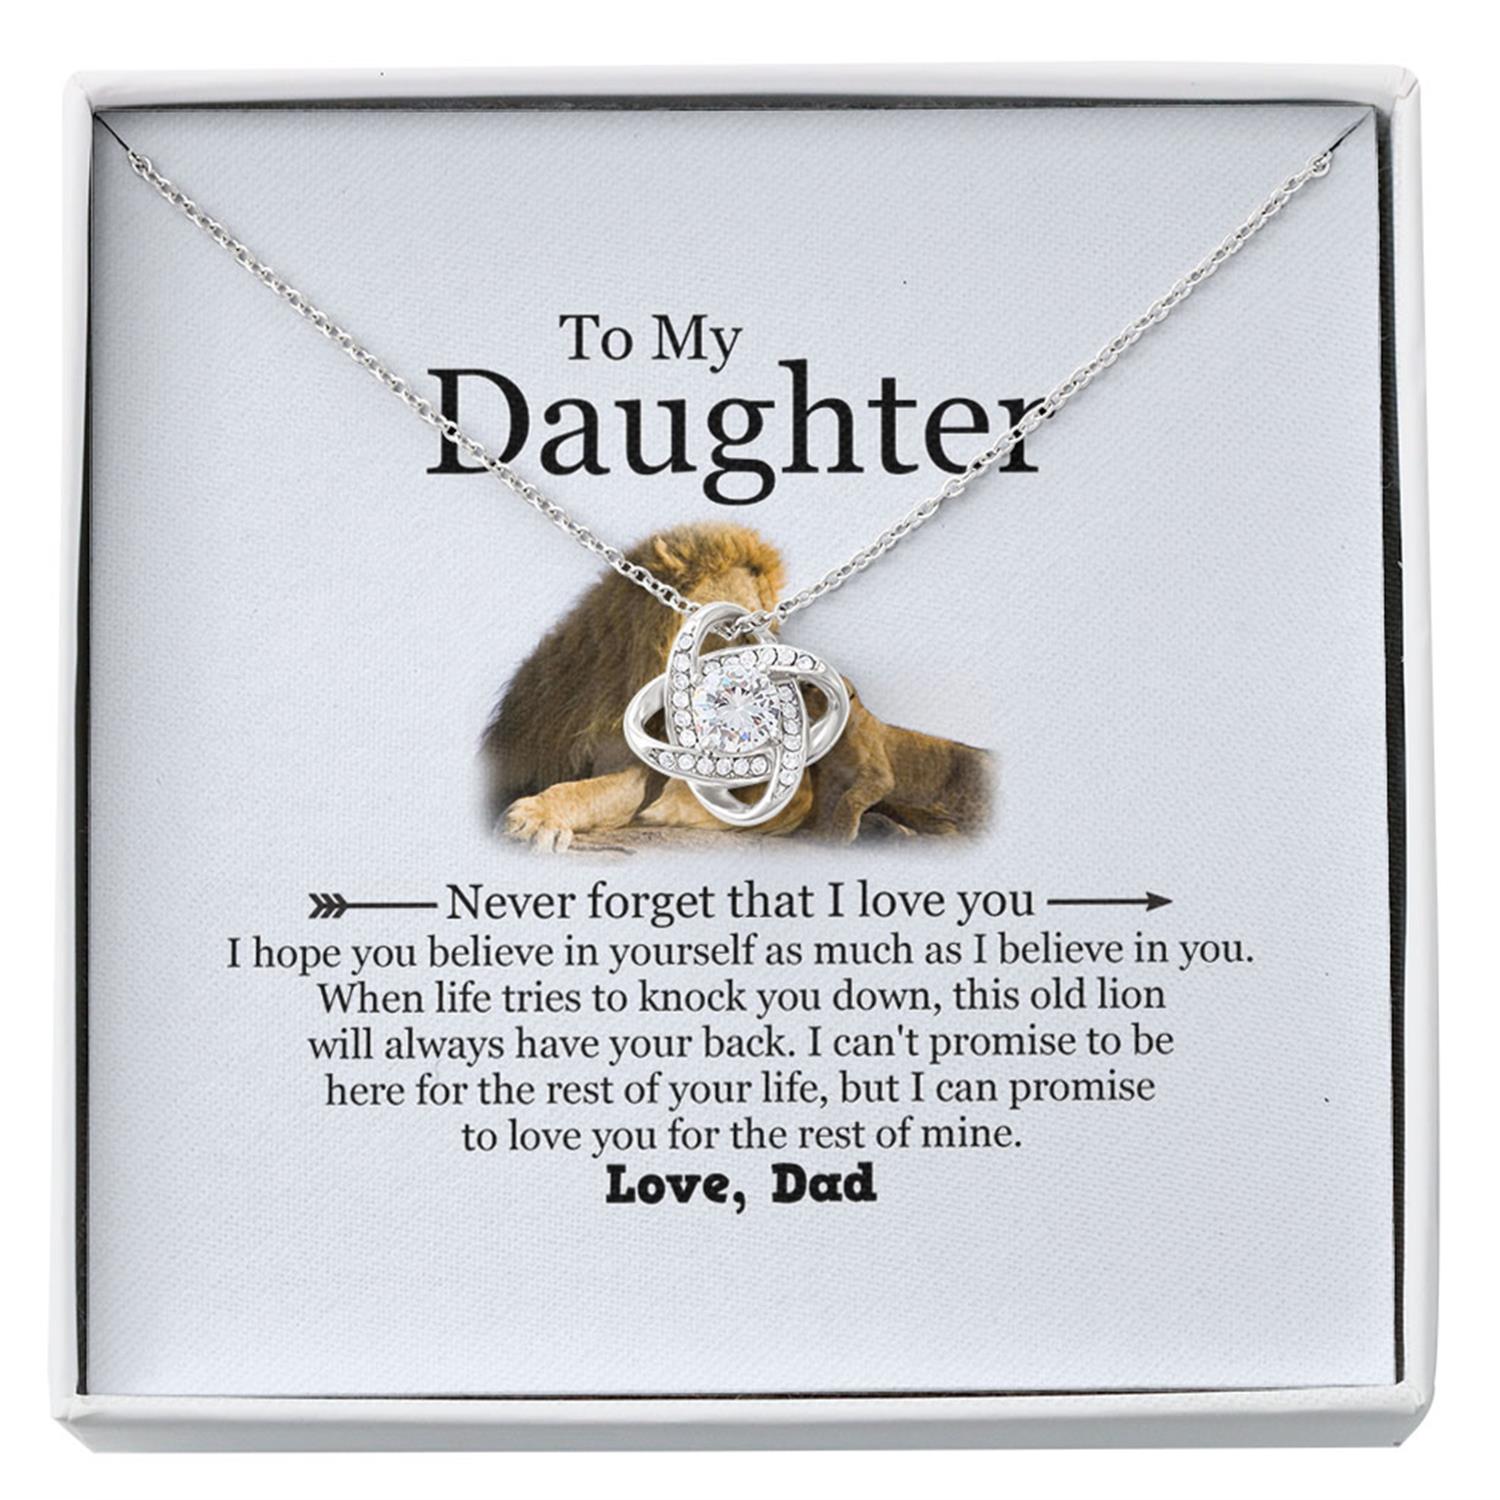 Daughter Necklace, To My Daughter Necklace Gift - This Old Lion Will Always Have Your Back Custom Necklace V4